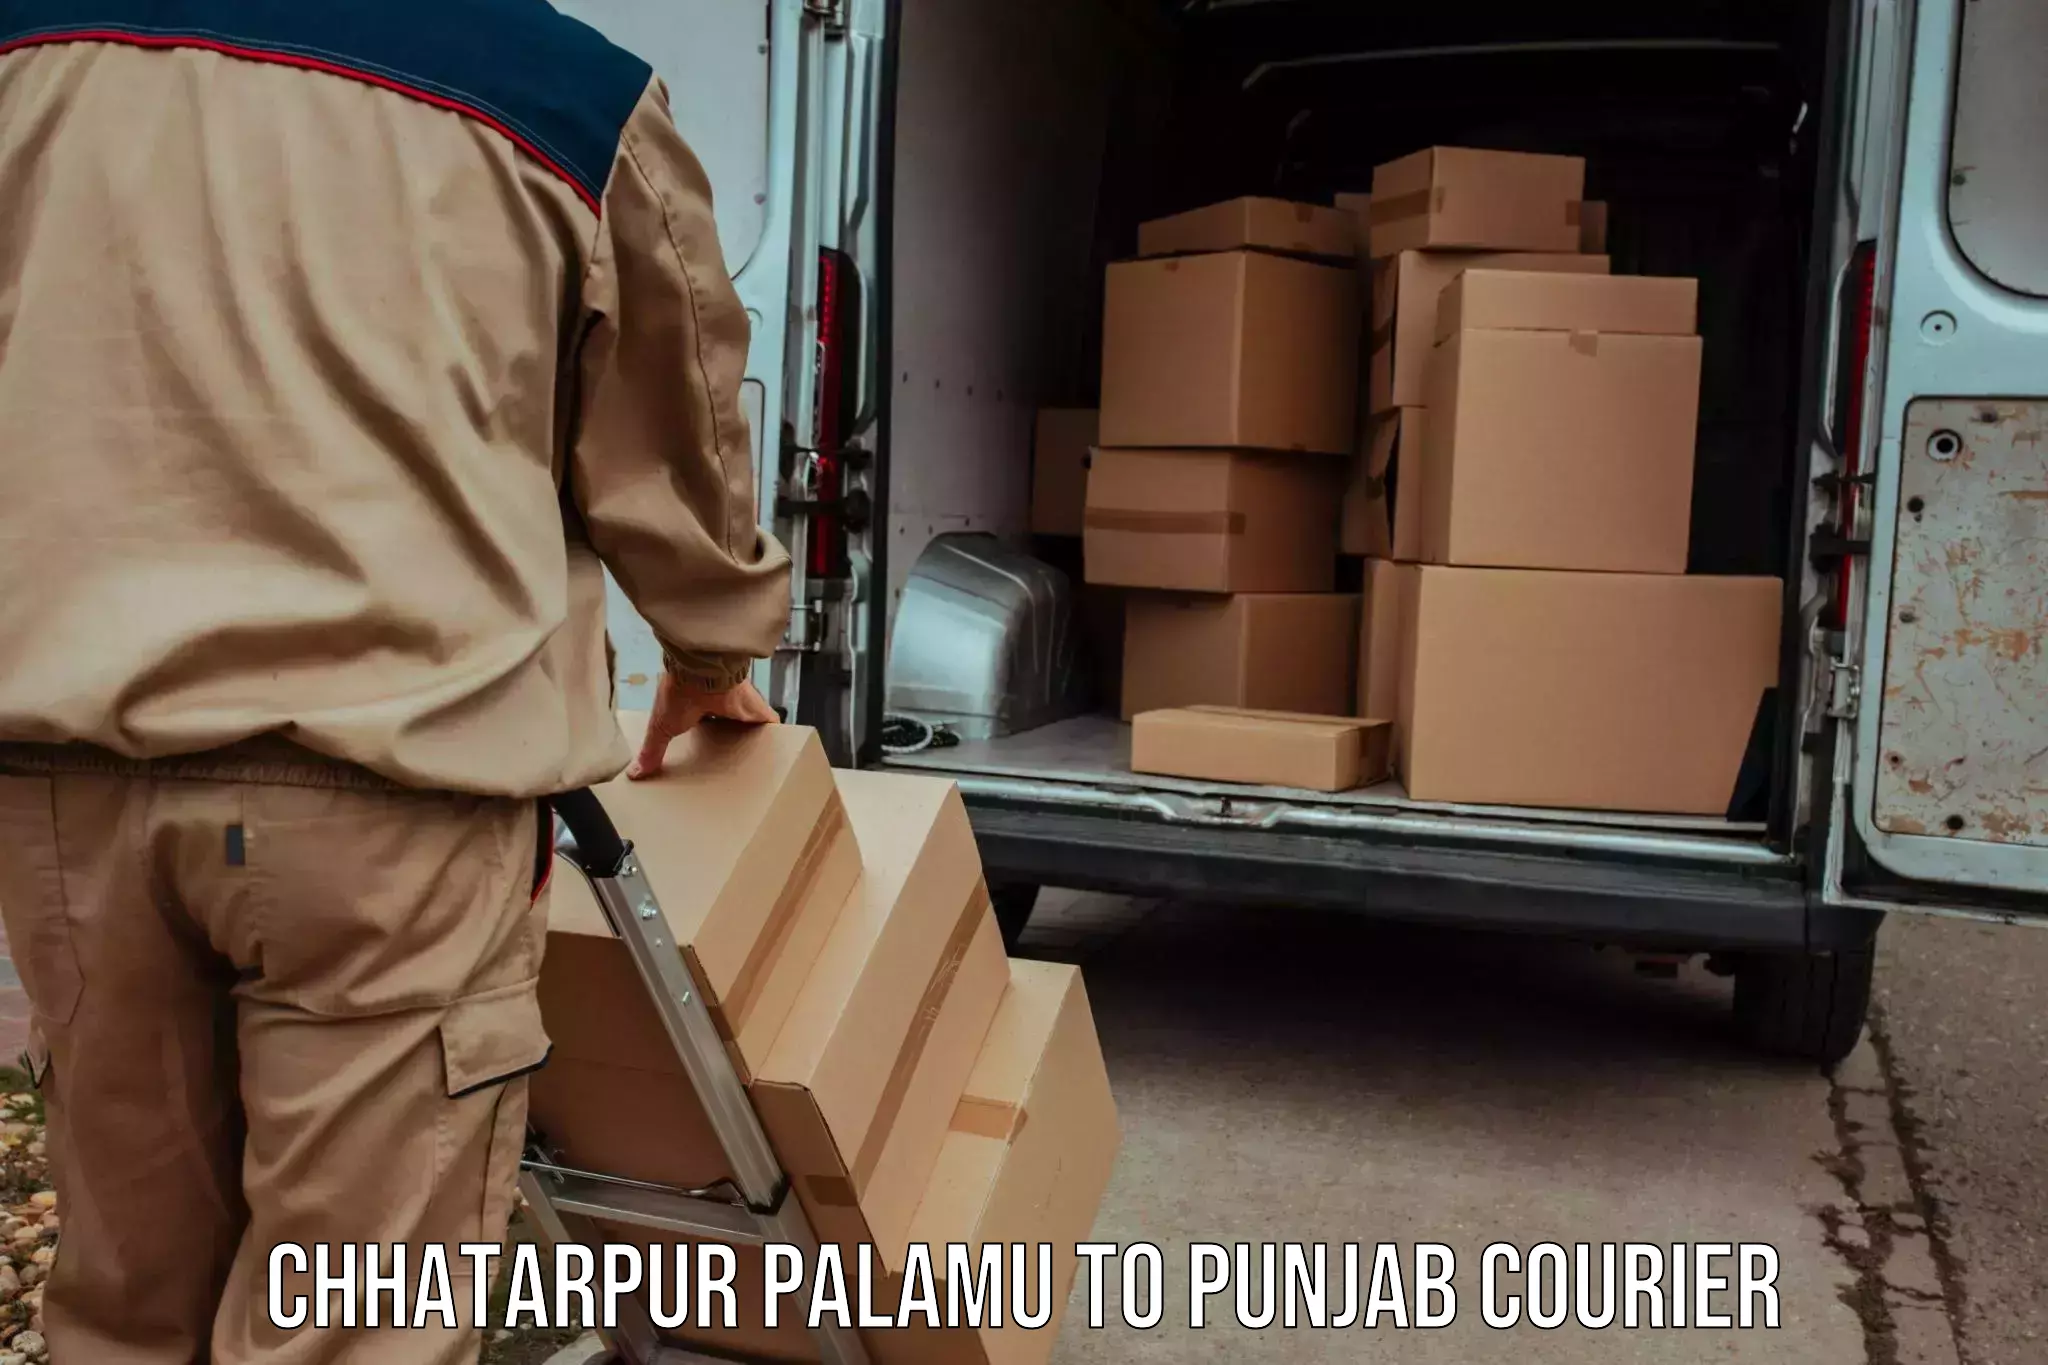 Reliable shipping partners Chhatarpur Palamu to Sultanpur Lodhi